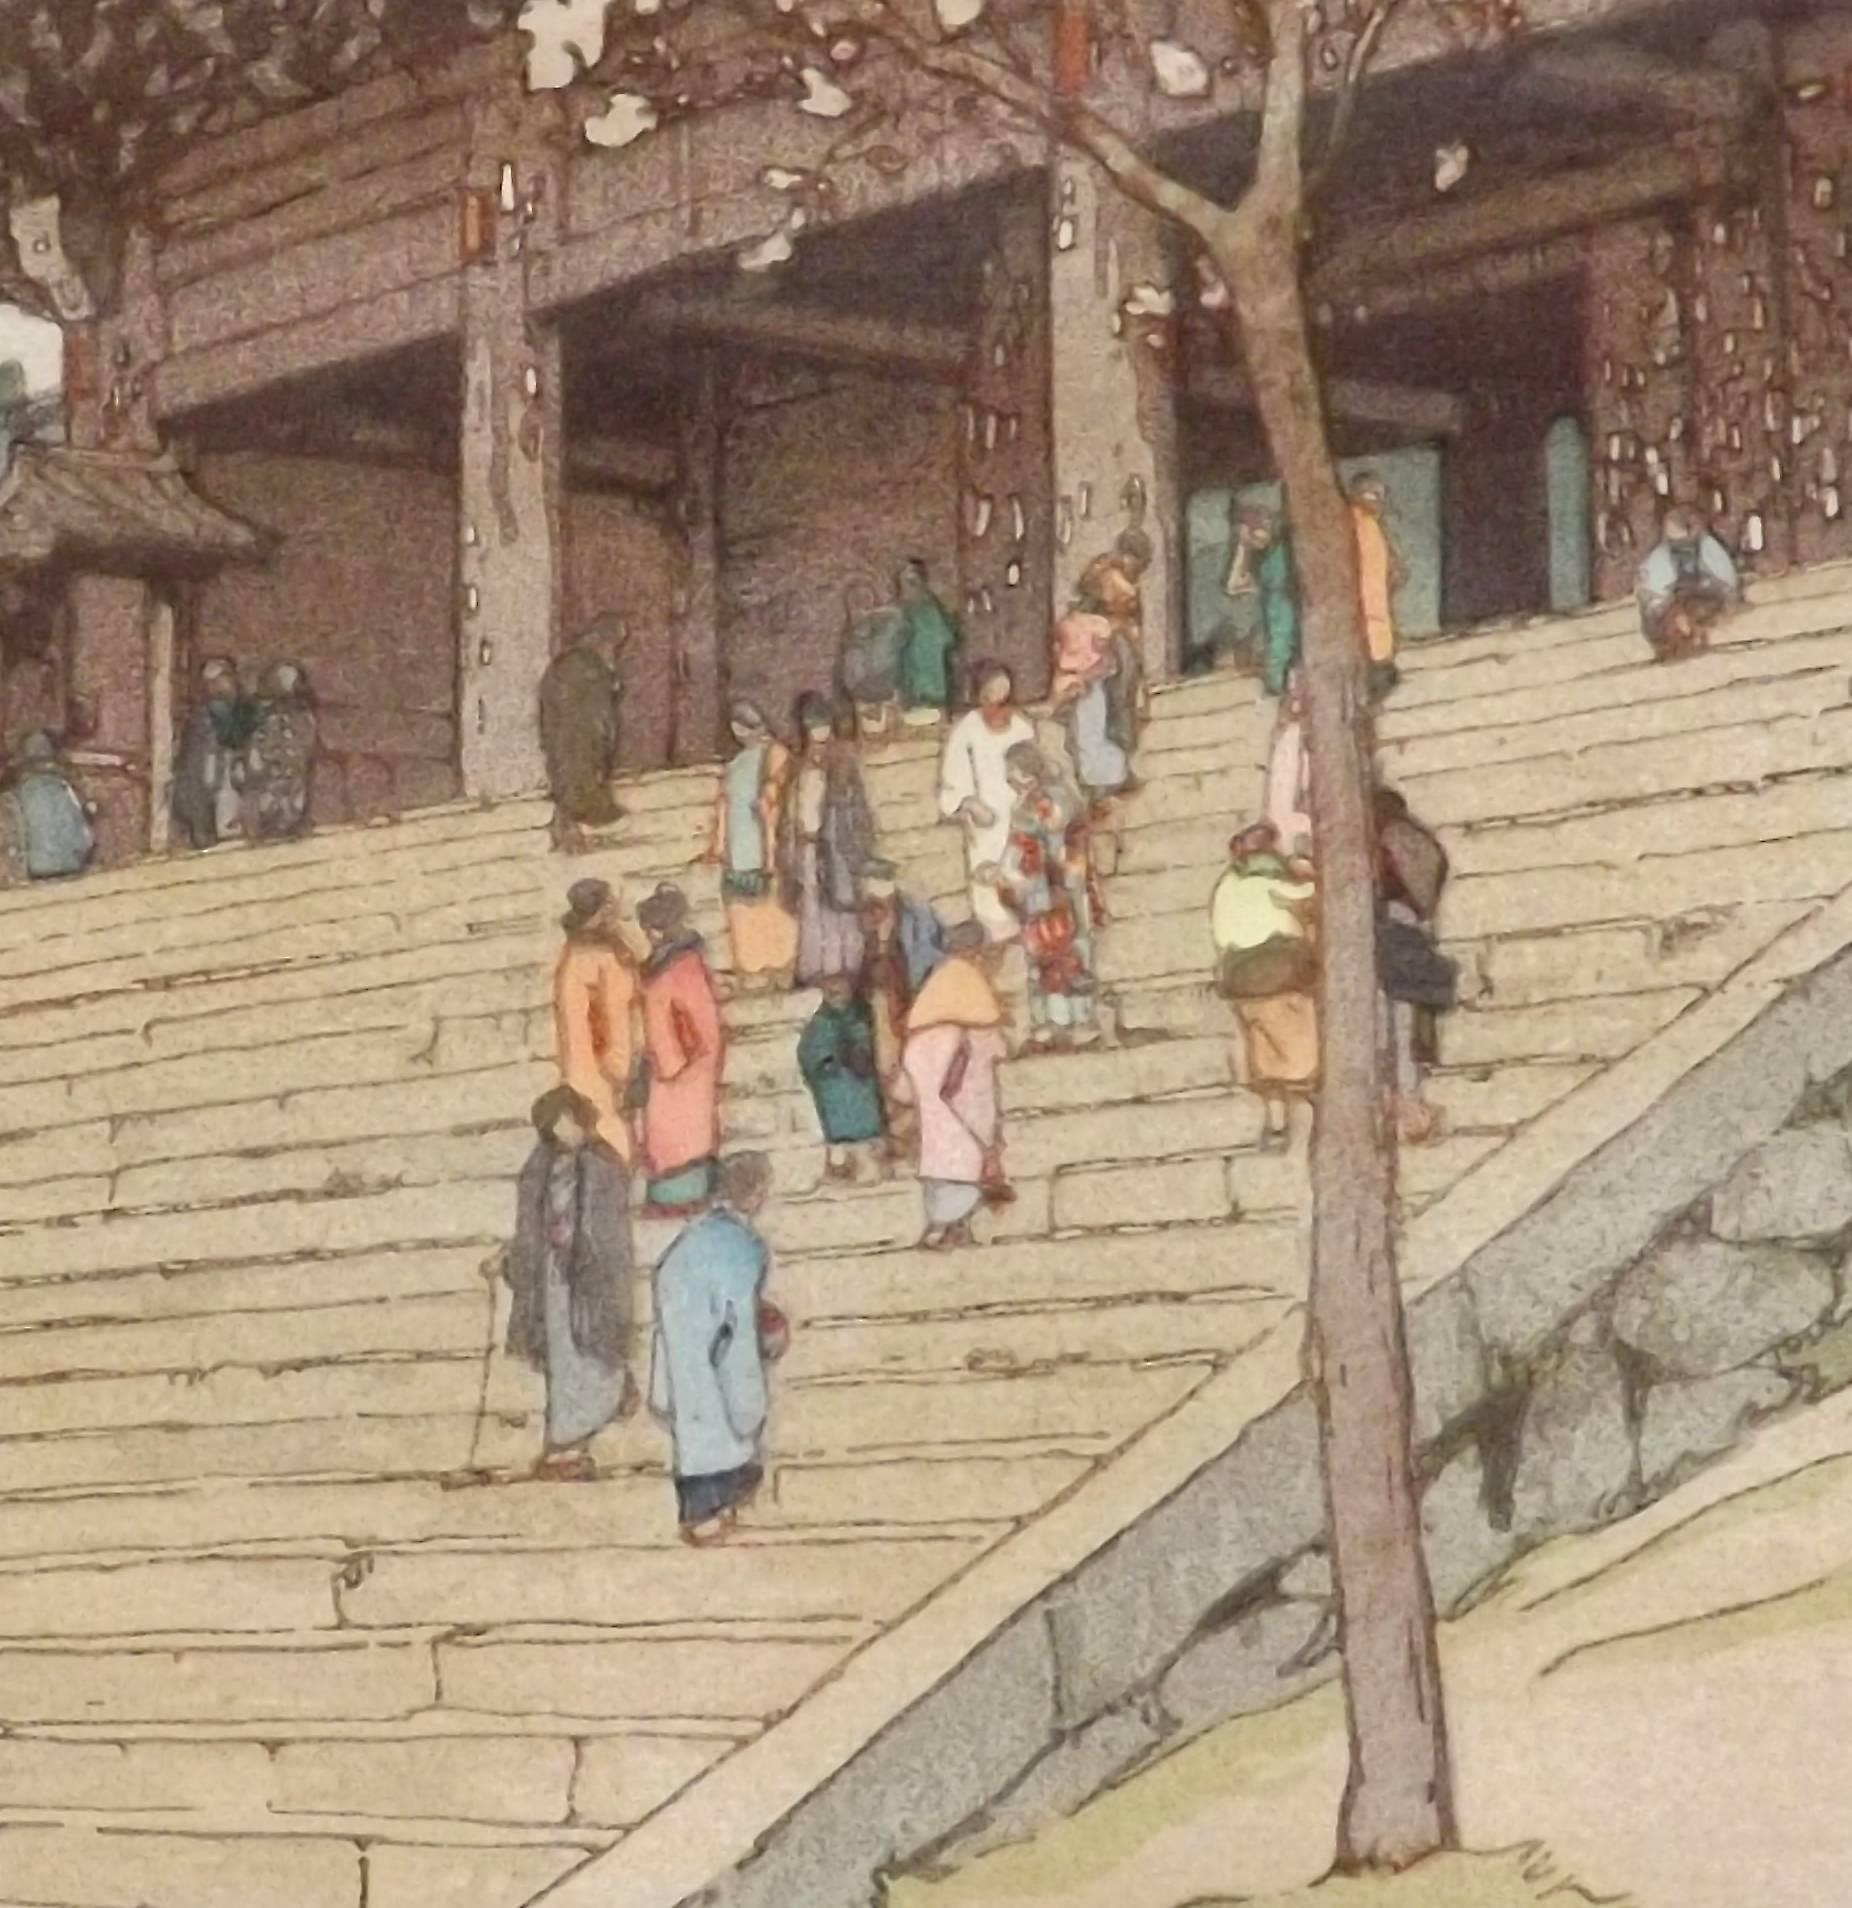 A wonderful woodblock print of Chion-in temple gate by the famed Japanese artist Hiroshi Yoshida (1876 - 1950). Signed in pencil bottom right, image dimensions are 14 3/4 inches tall by 9 1/2 inches wide.